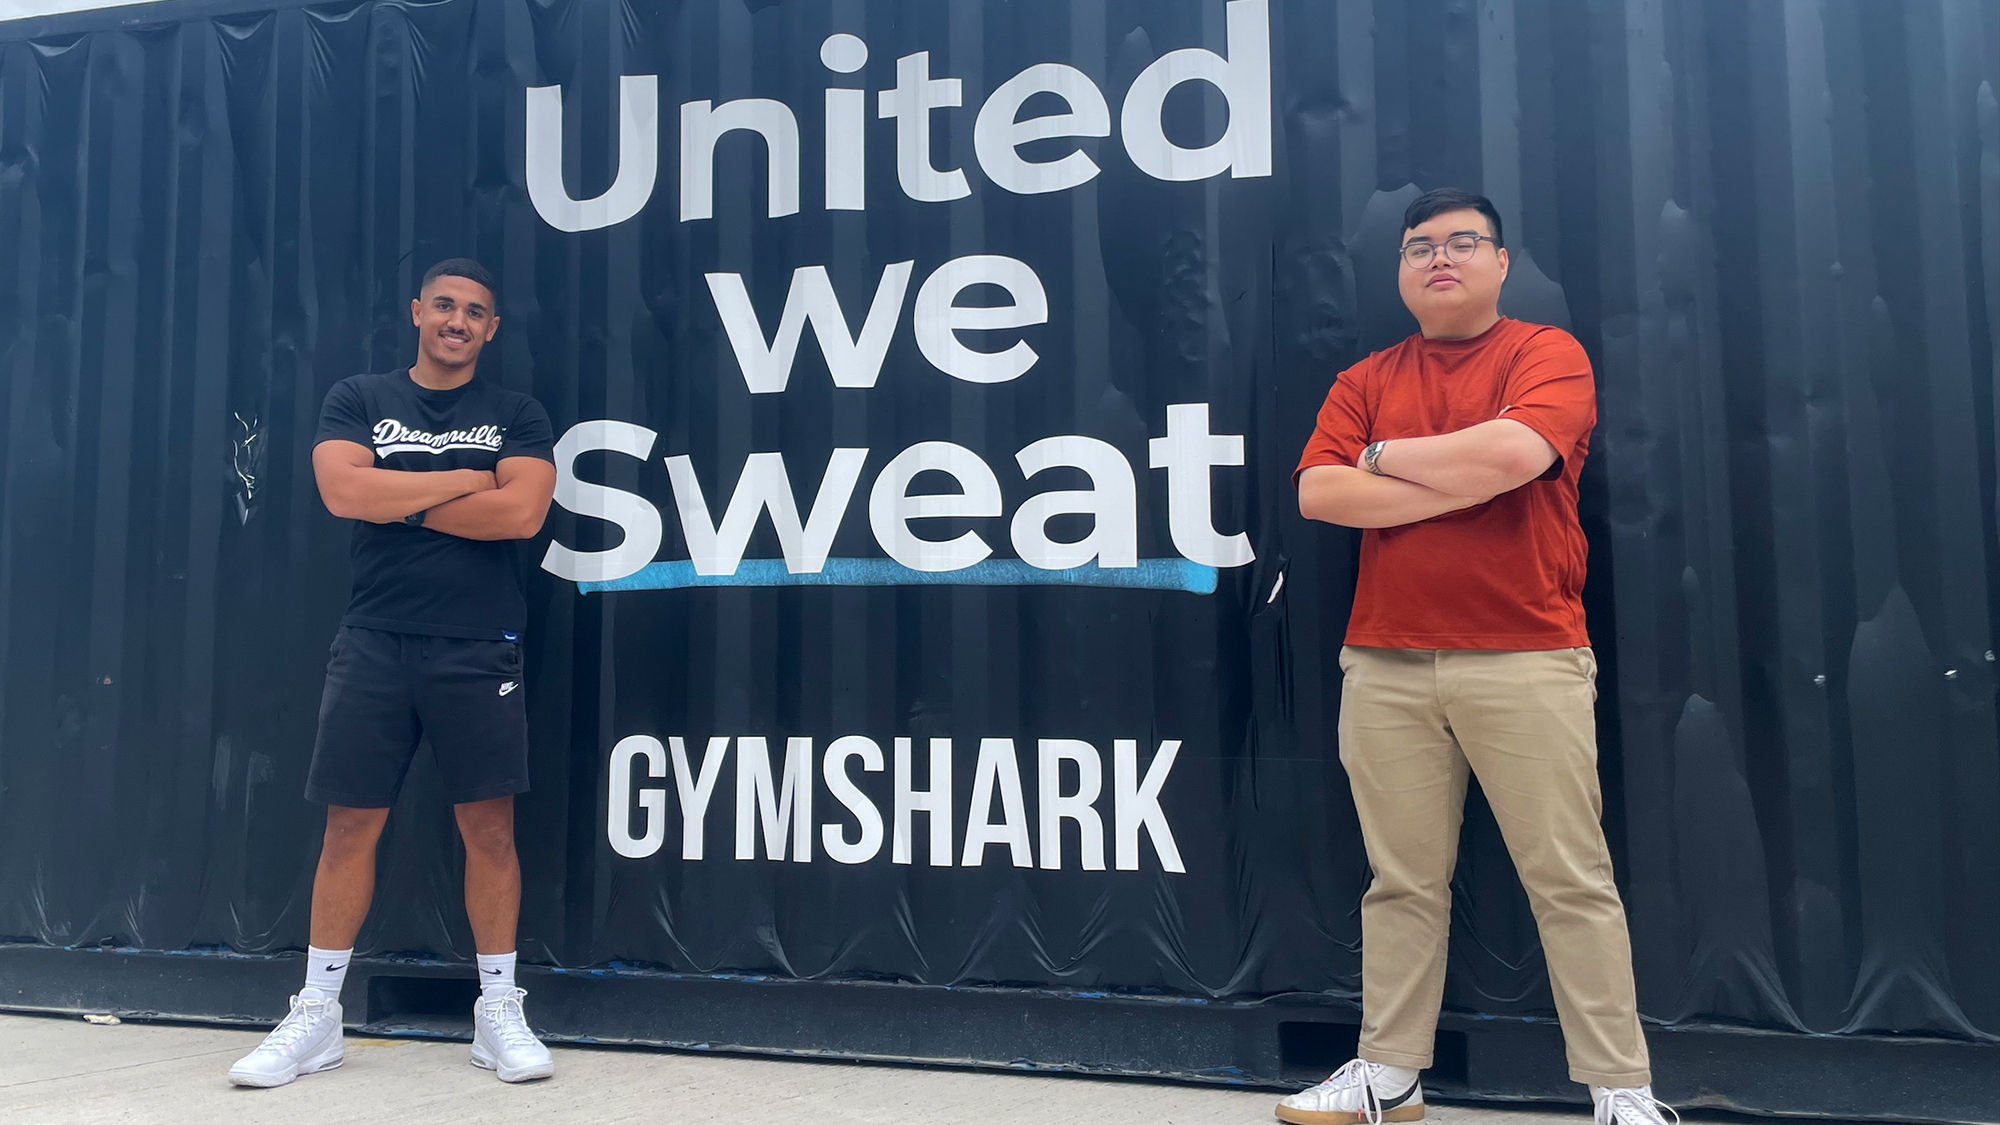 Two young men stood next to the Gymshark logo and strapline 'united we sweat' painted on a dark blue shipping container.